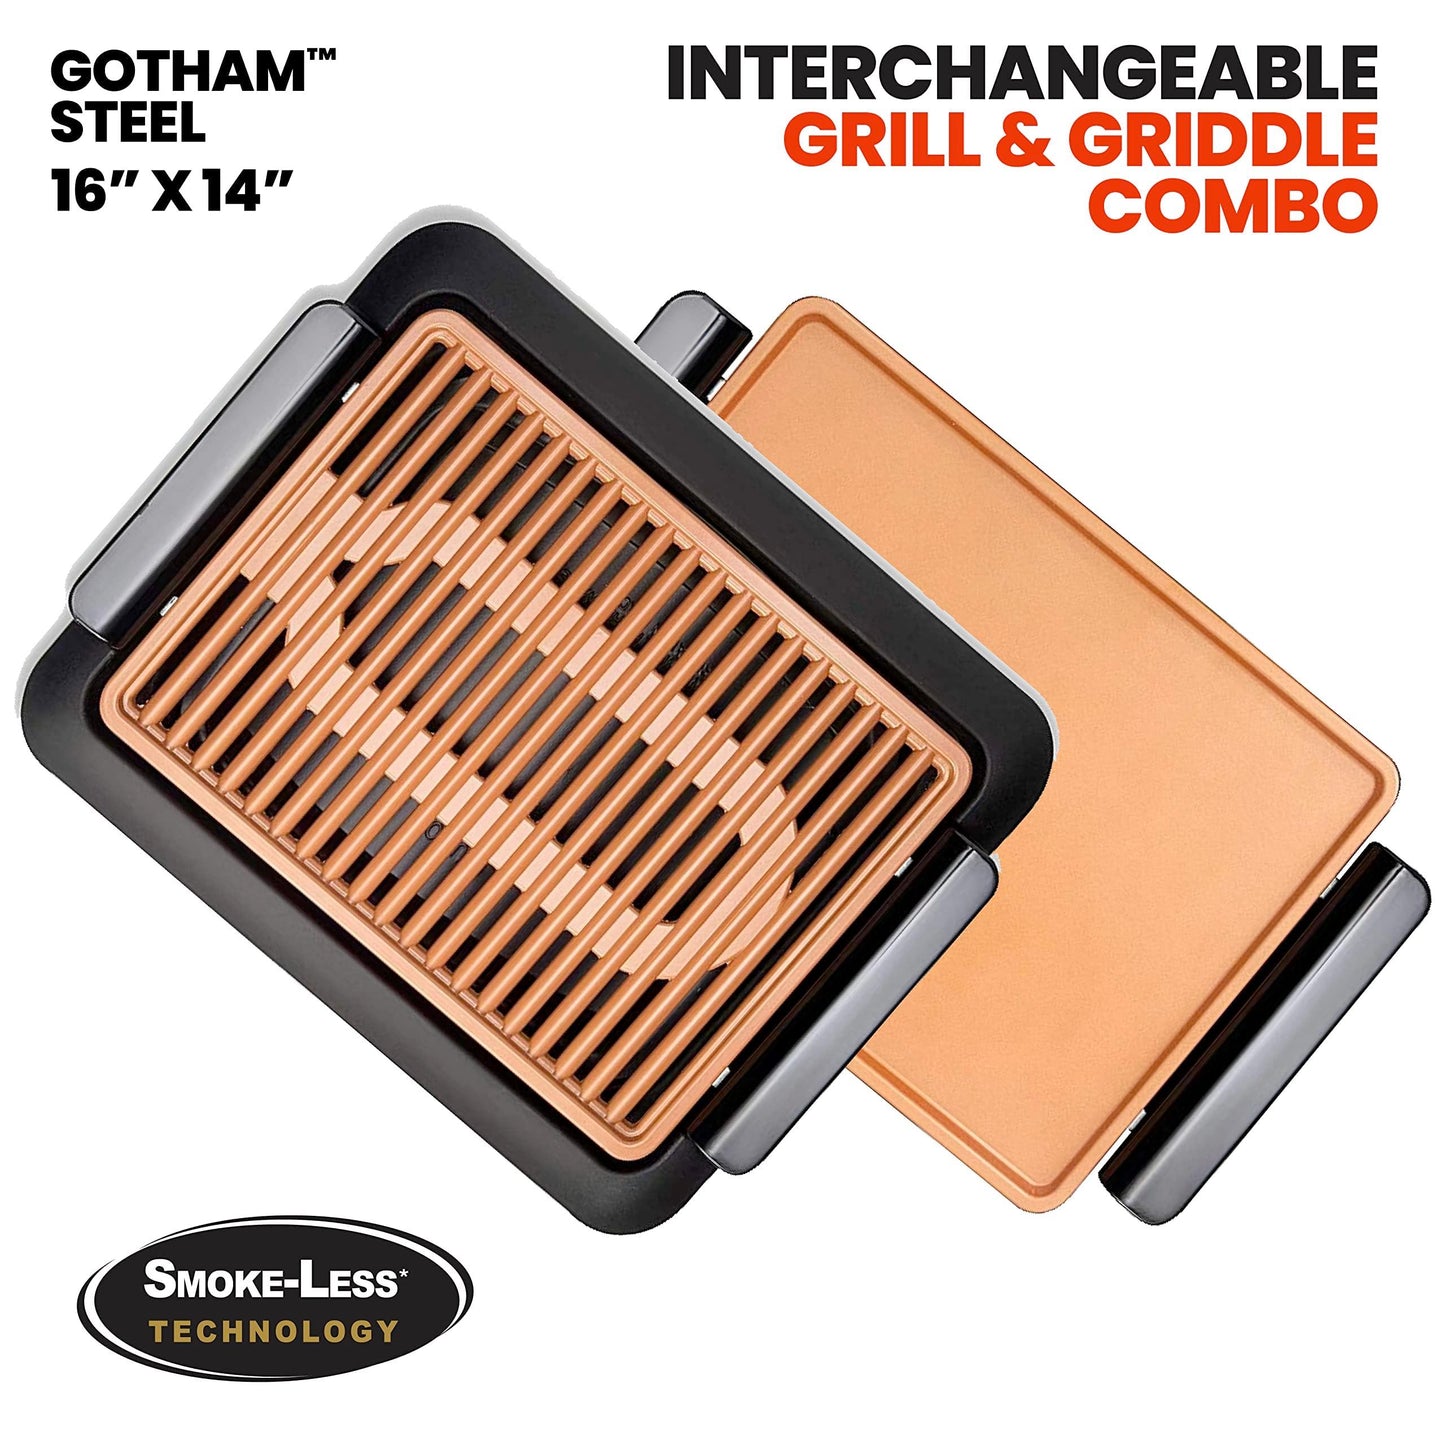 Gotham Steel Smokeless Indoor Grill with Ceramic Coating & Adjustable Heating, Electric Removable Grill/Griddle Plate, Nonstick, Healthy & Toxin Free - CookCave